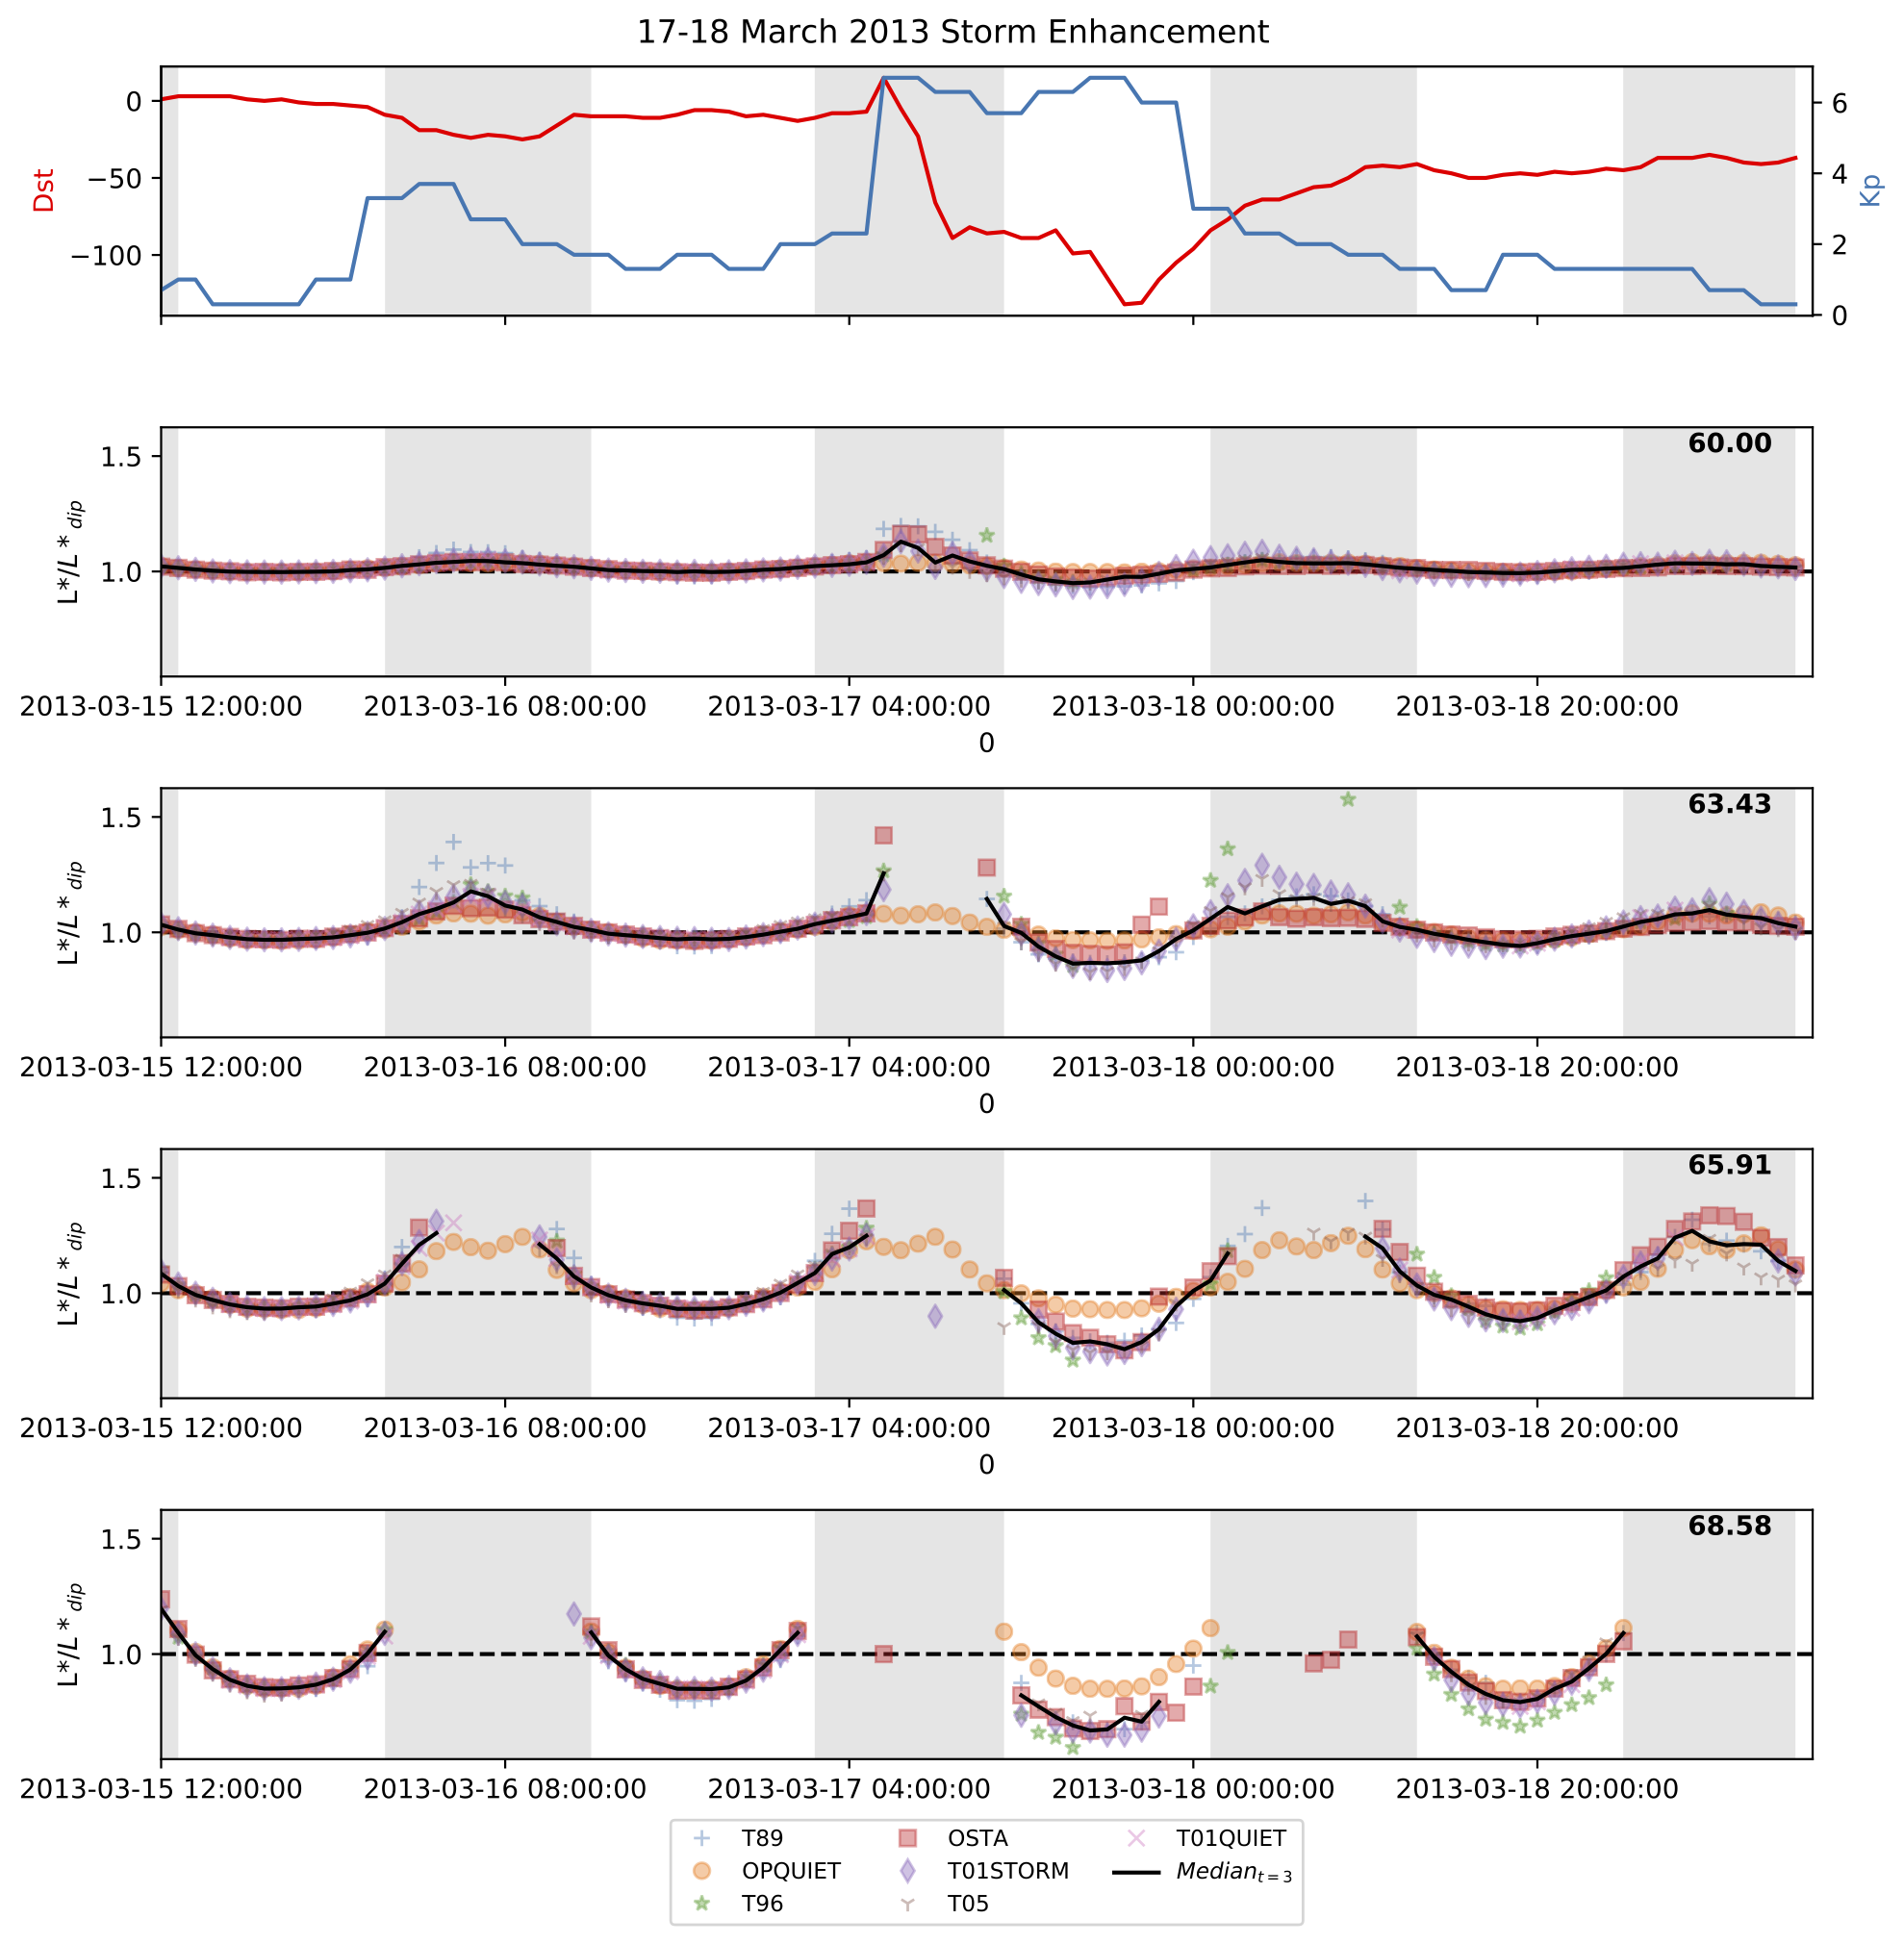 Timeseries during a geomagnetic storm. Panels show the level of activity and the L* value according to multiple models at different geomagnetic latitudes.